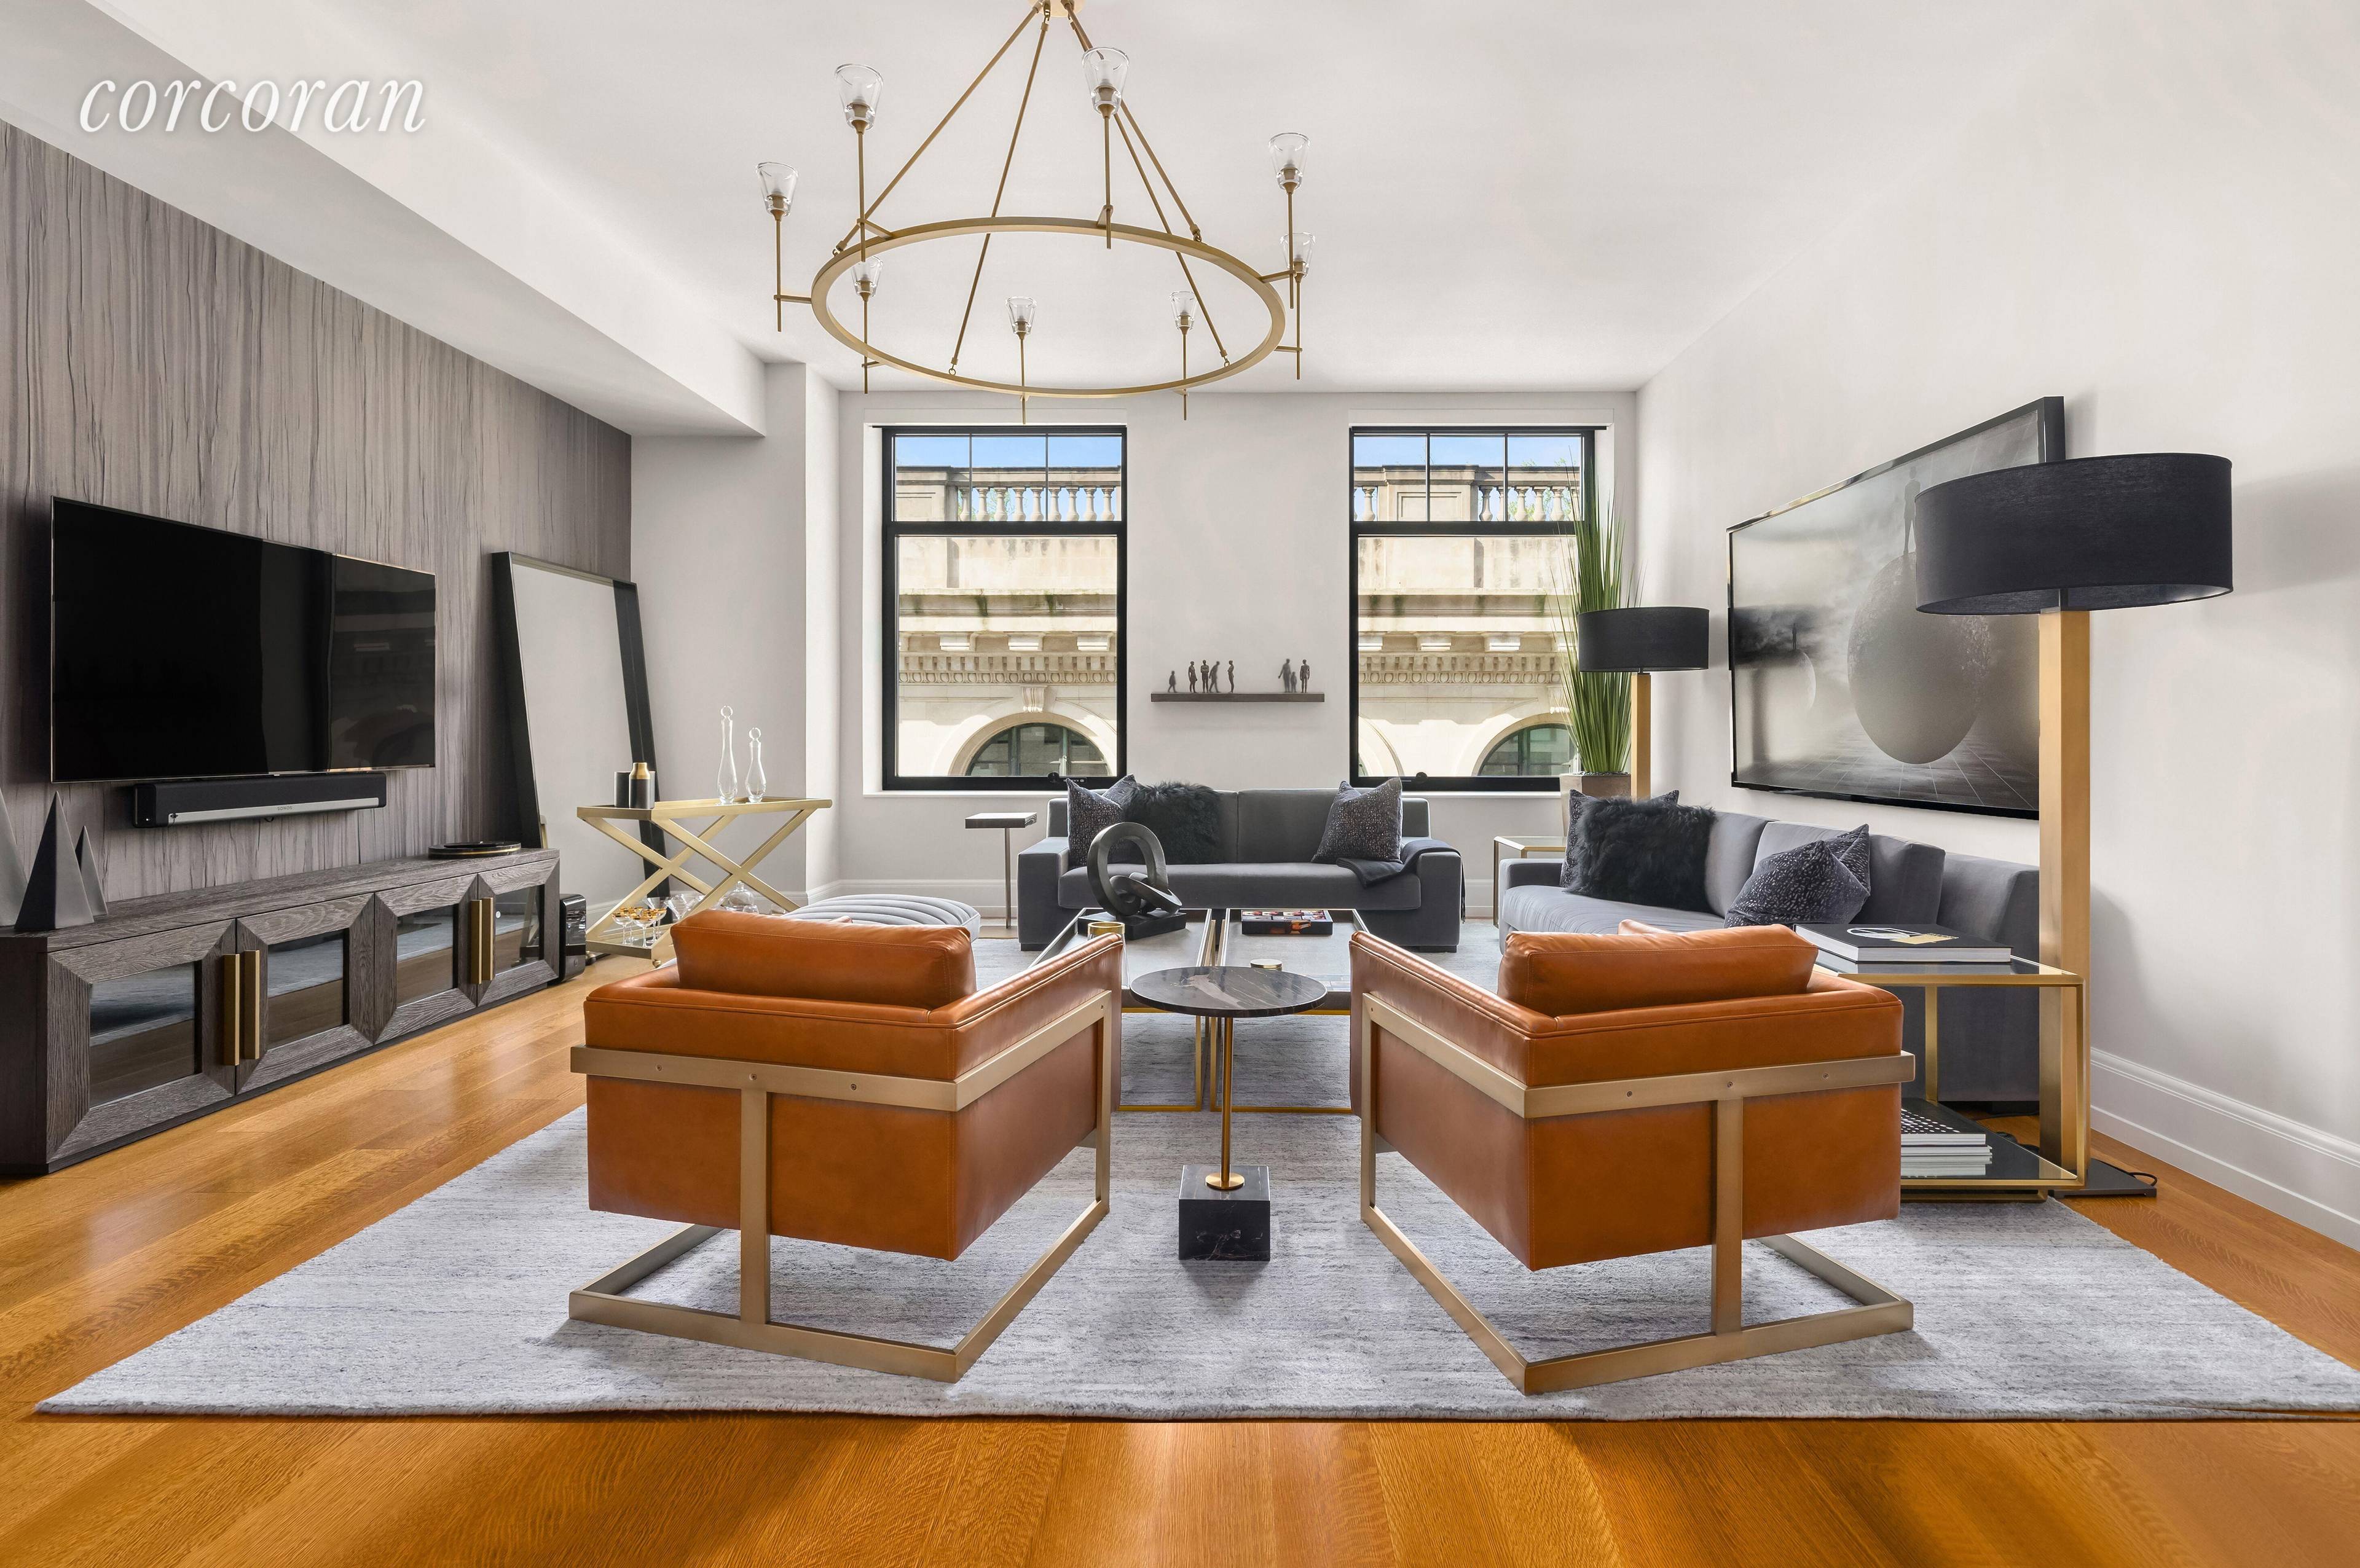 Located right on Madison Square Park, this oversized two bedroom, two and half bath new condominium residence offers exquisitely designed spaces for the modern lifestyle.